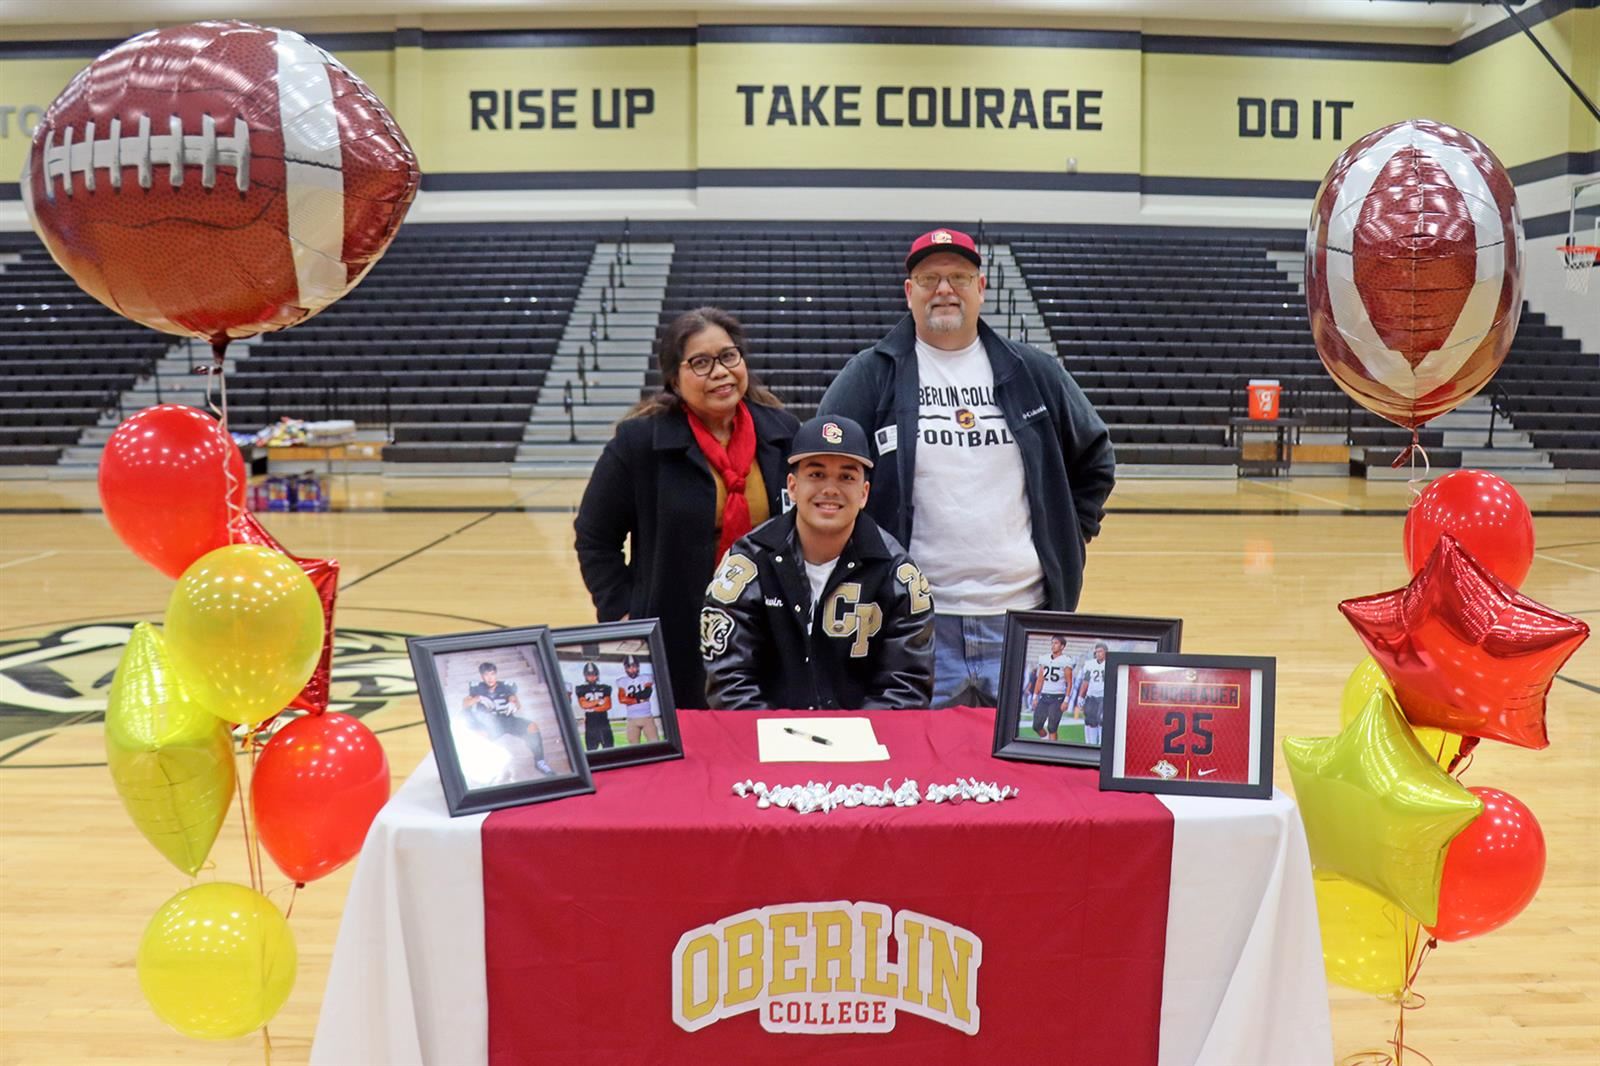 Cypress Park High School senior Devin Neugebauer, seated, signed his letter of intent to play football at Oberlin College.